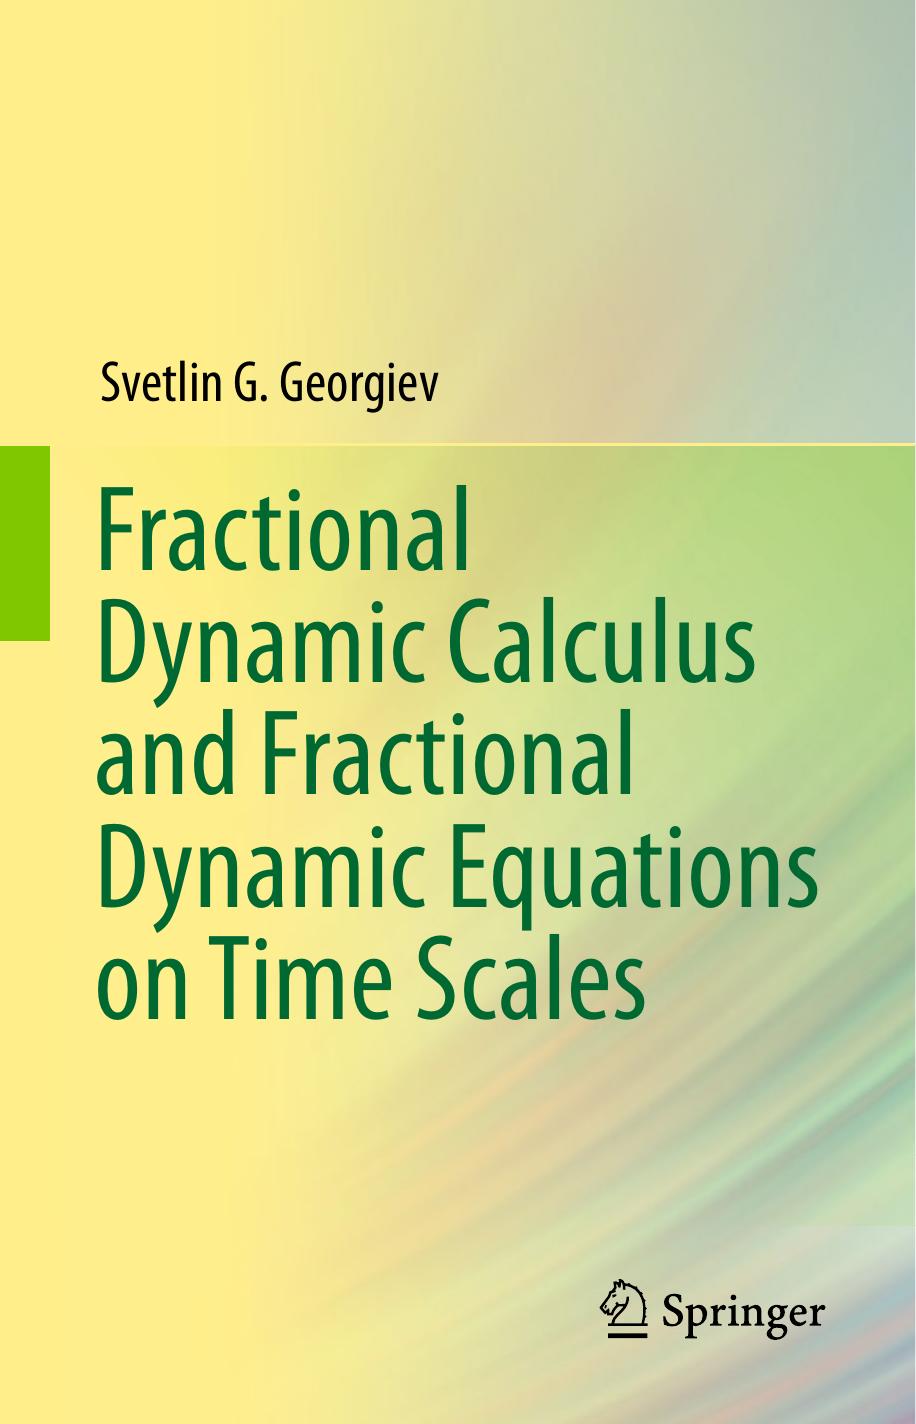 Fractional Dynamic Calculus and Fractional Dynamic Equations on Time Scales by Svetlin G. Georgiev